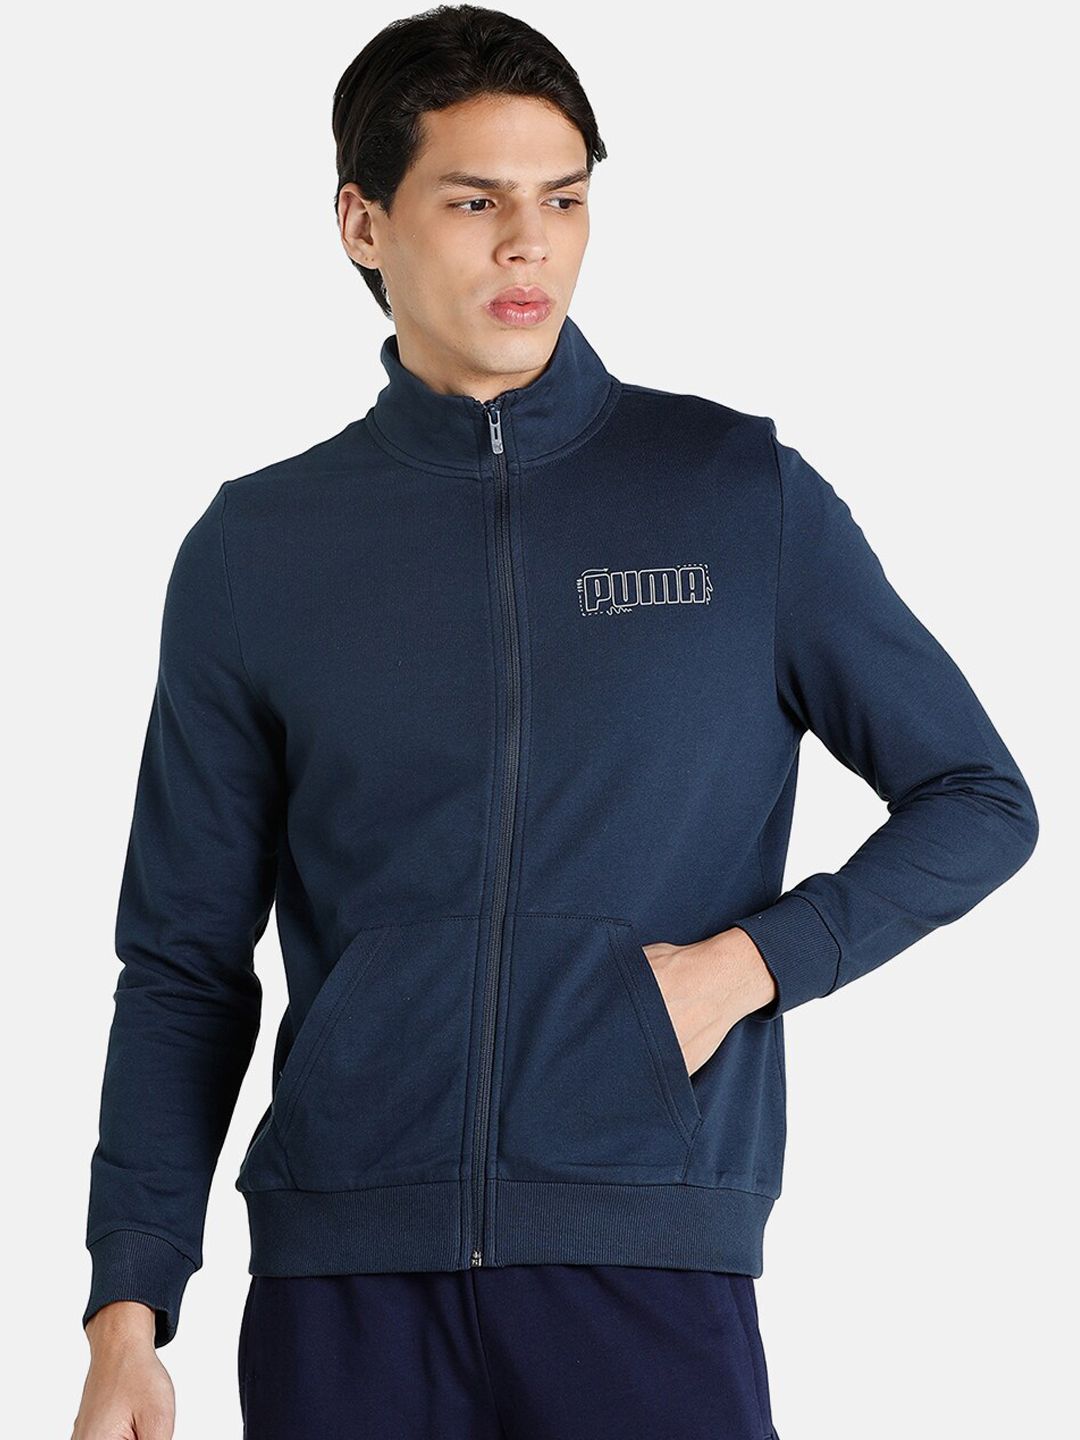 Puma Women Blue Graphic Open Front Jacket Price in India